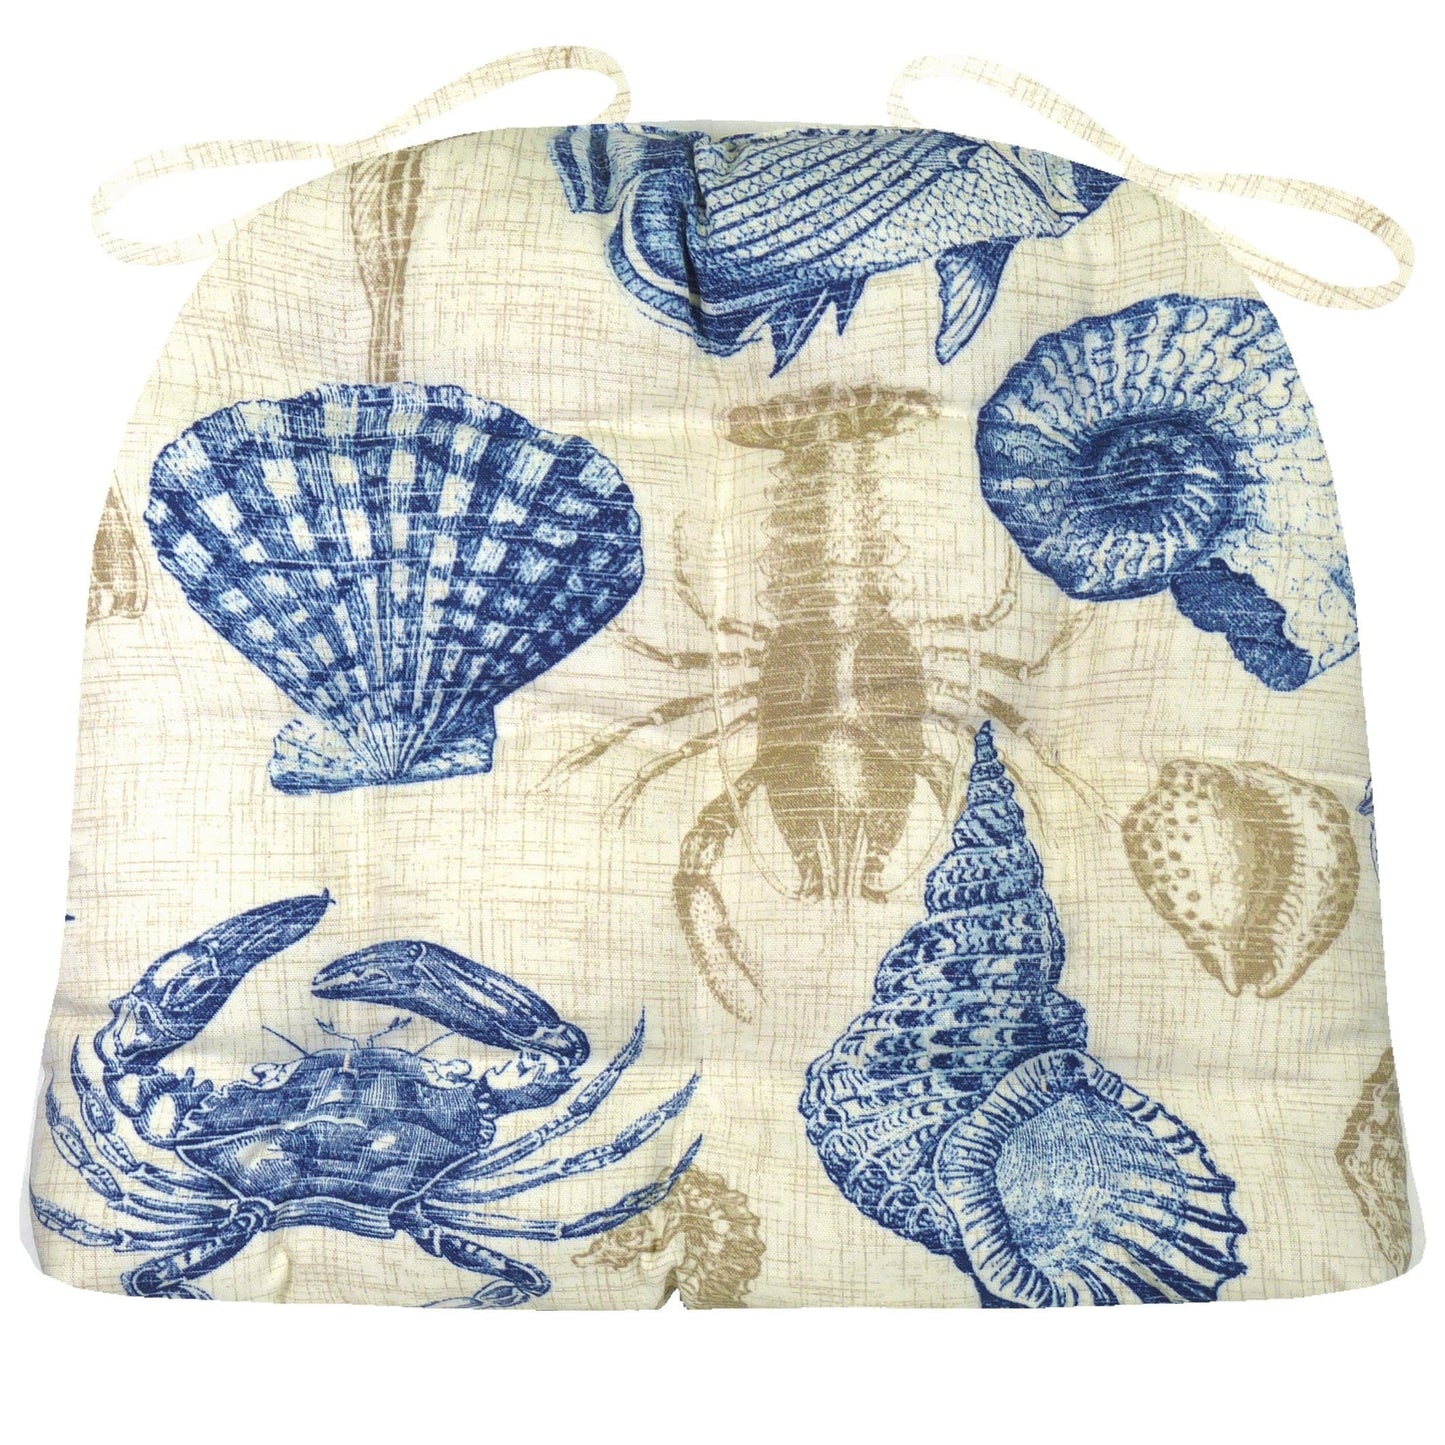 Sea Life Indoor / Outdoor Dining Chair Pads - Navy Blue and Brown - Aquatic - Oceanic - Coastal - New England - Fish - Crabs - Octopus